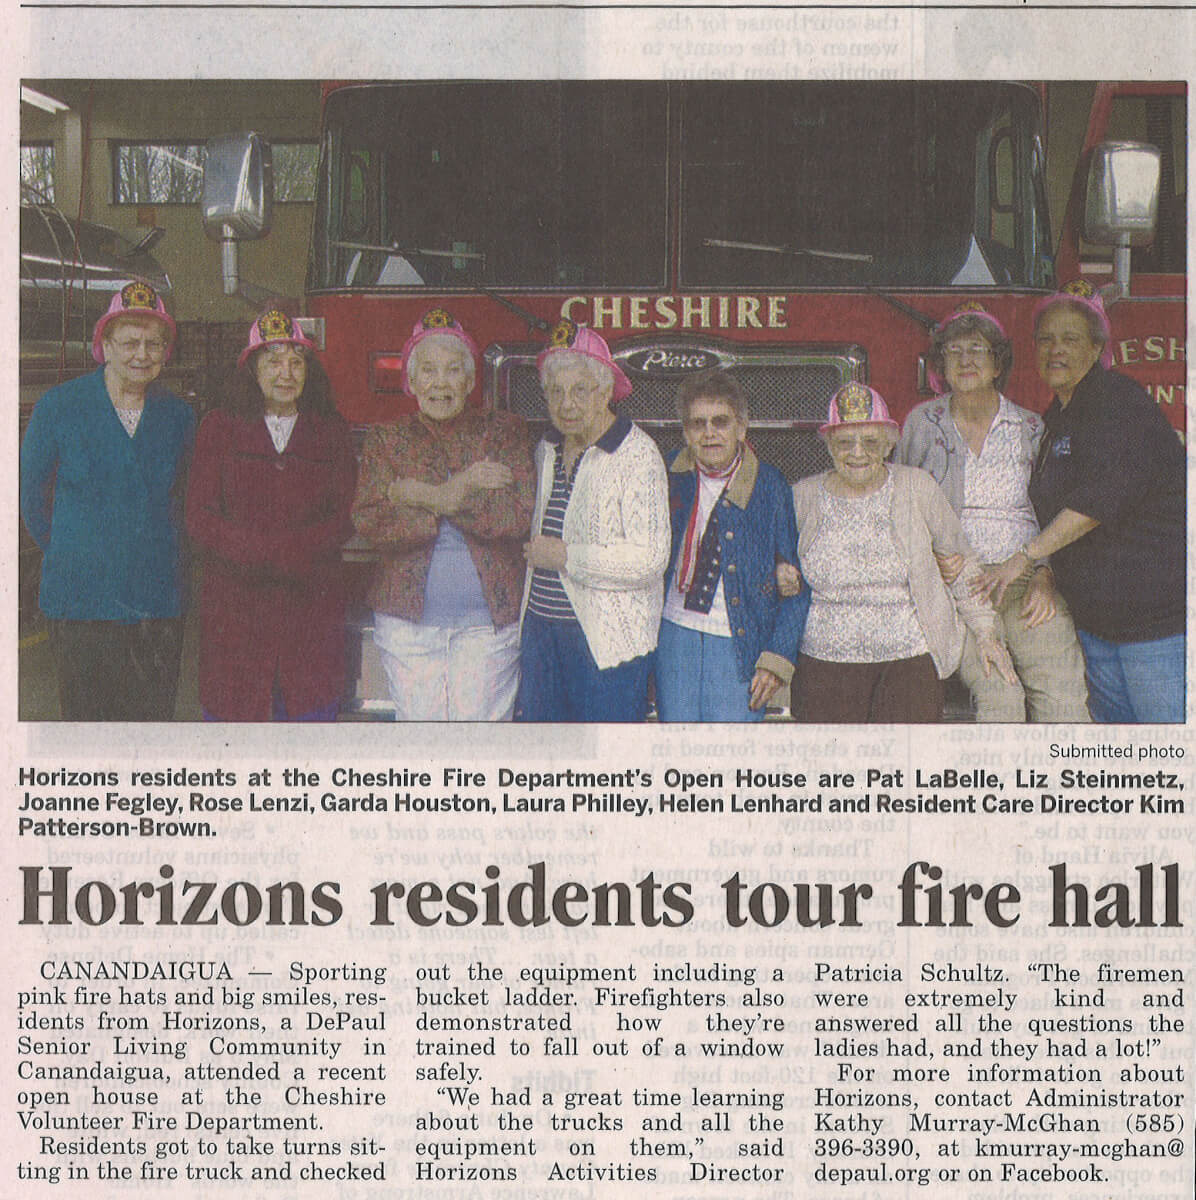 Horizons residents tour fire hall, article in the Daily Messenger  June 14, 2017